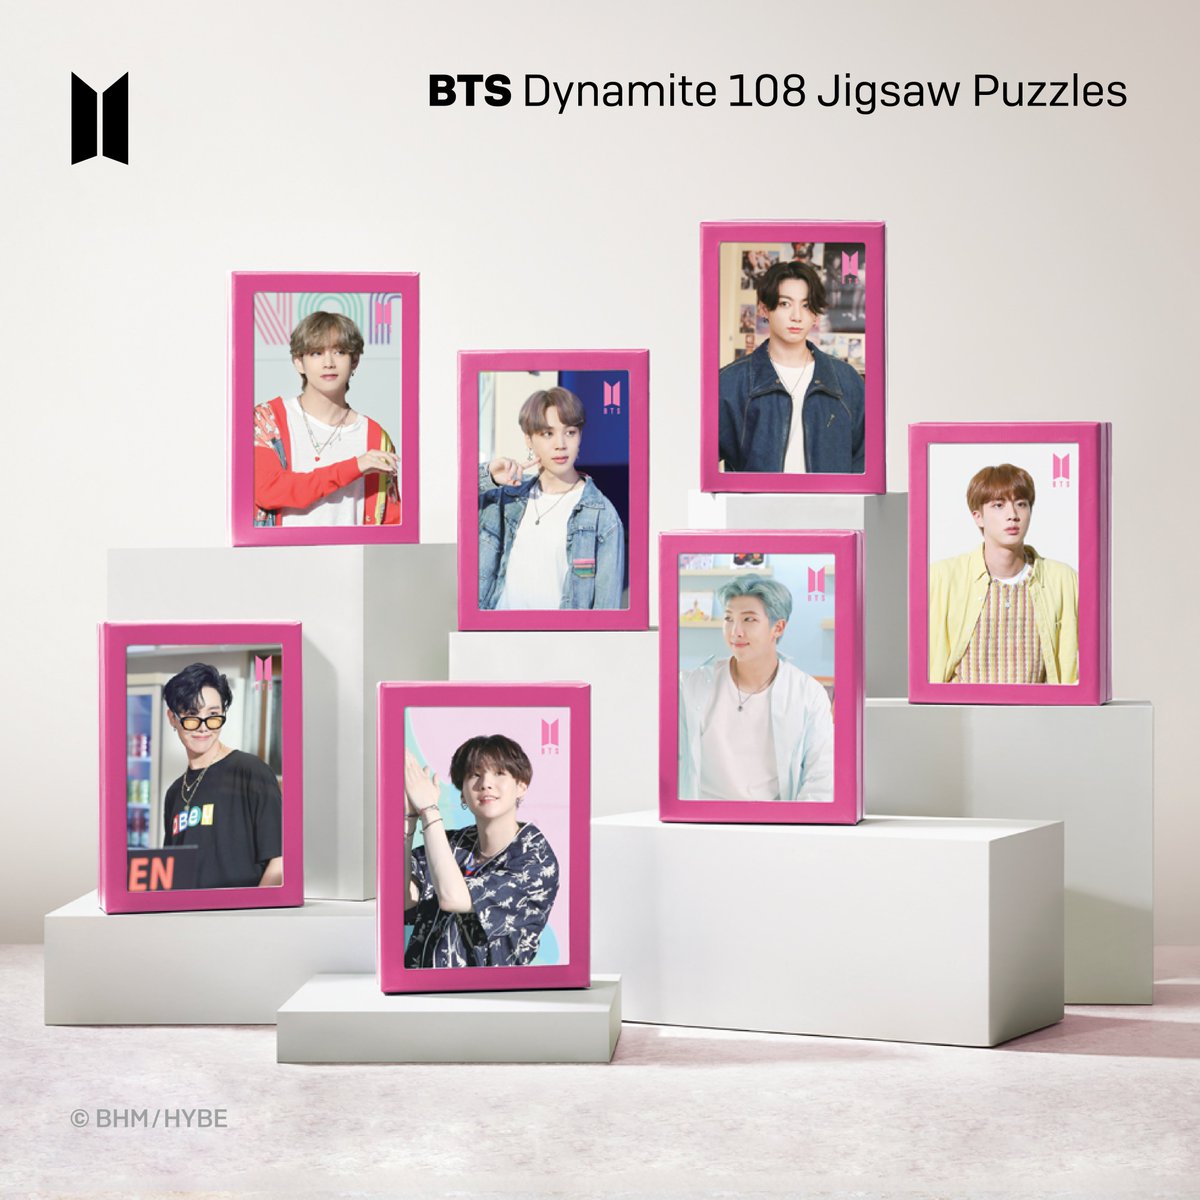 [April 2021] Newly Launched Licensed Products!BTS Dynamite  @dw_ci 108 Jigsaw Puzzles available in Korea